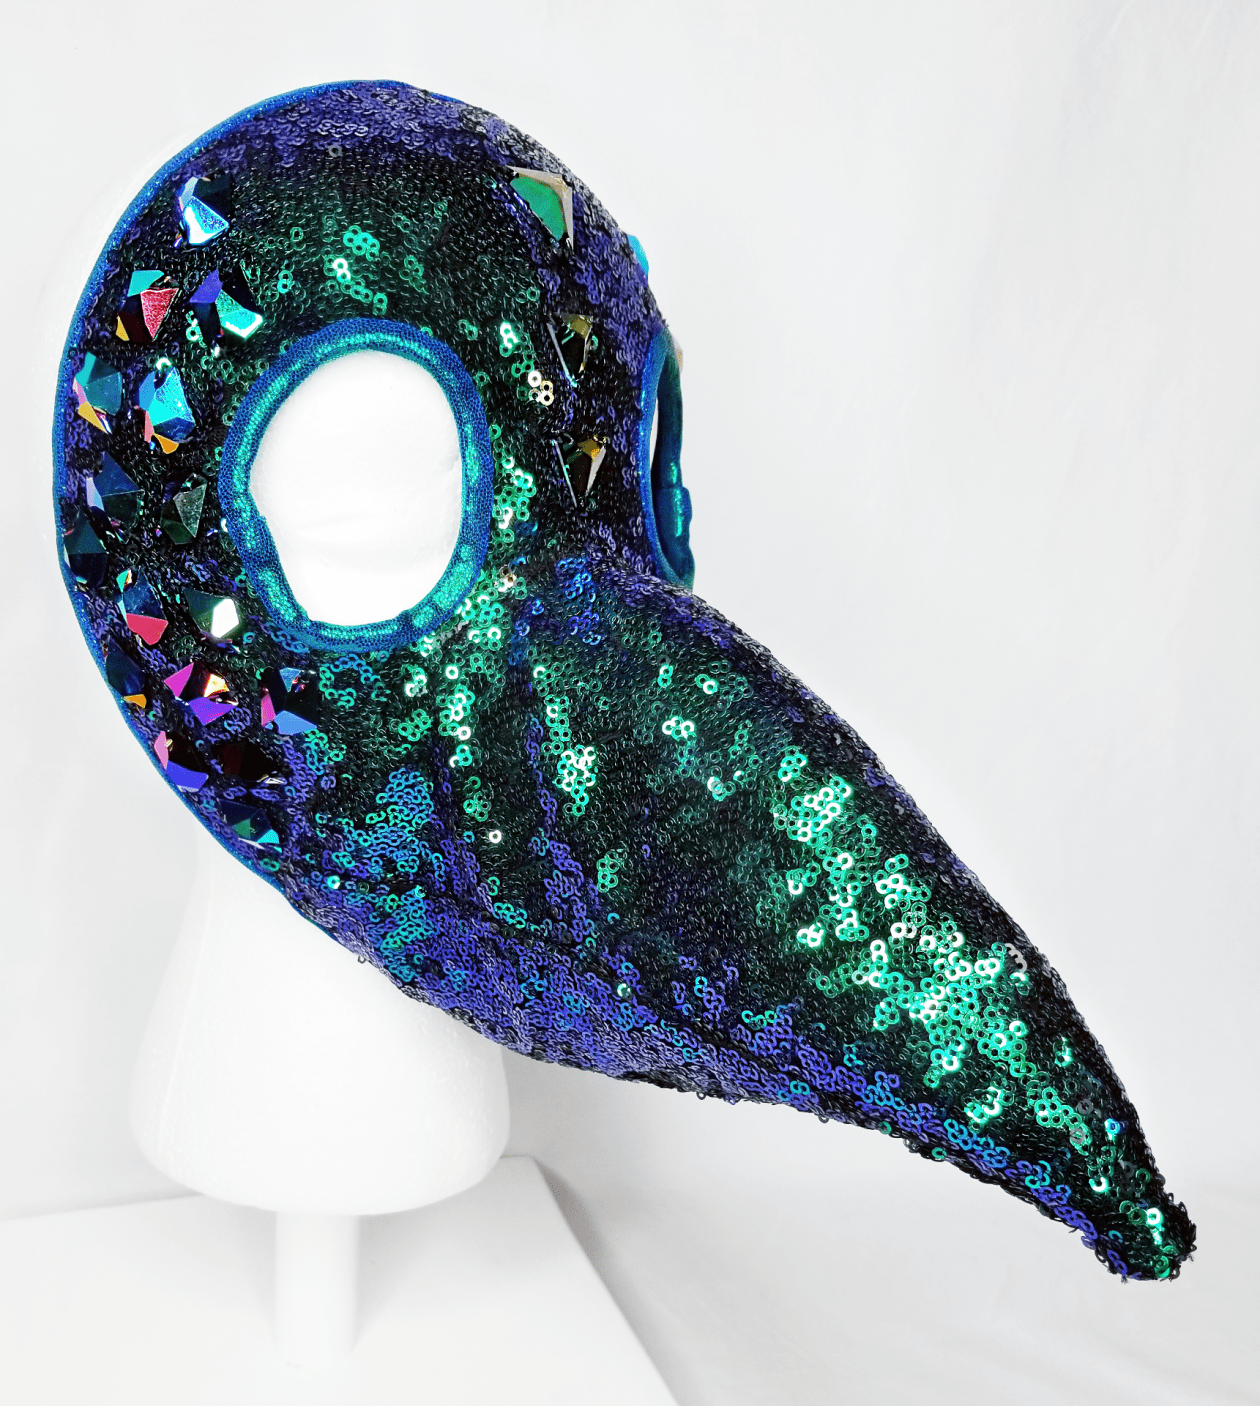 A green and blue sequin beaked mask